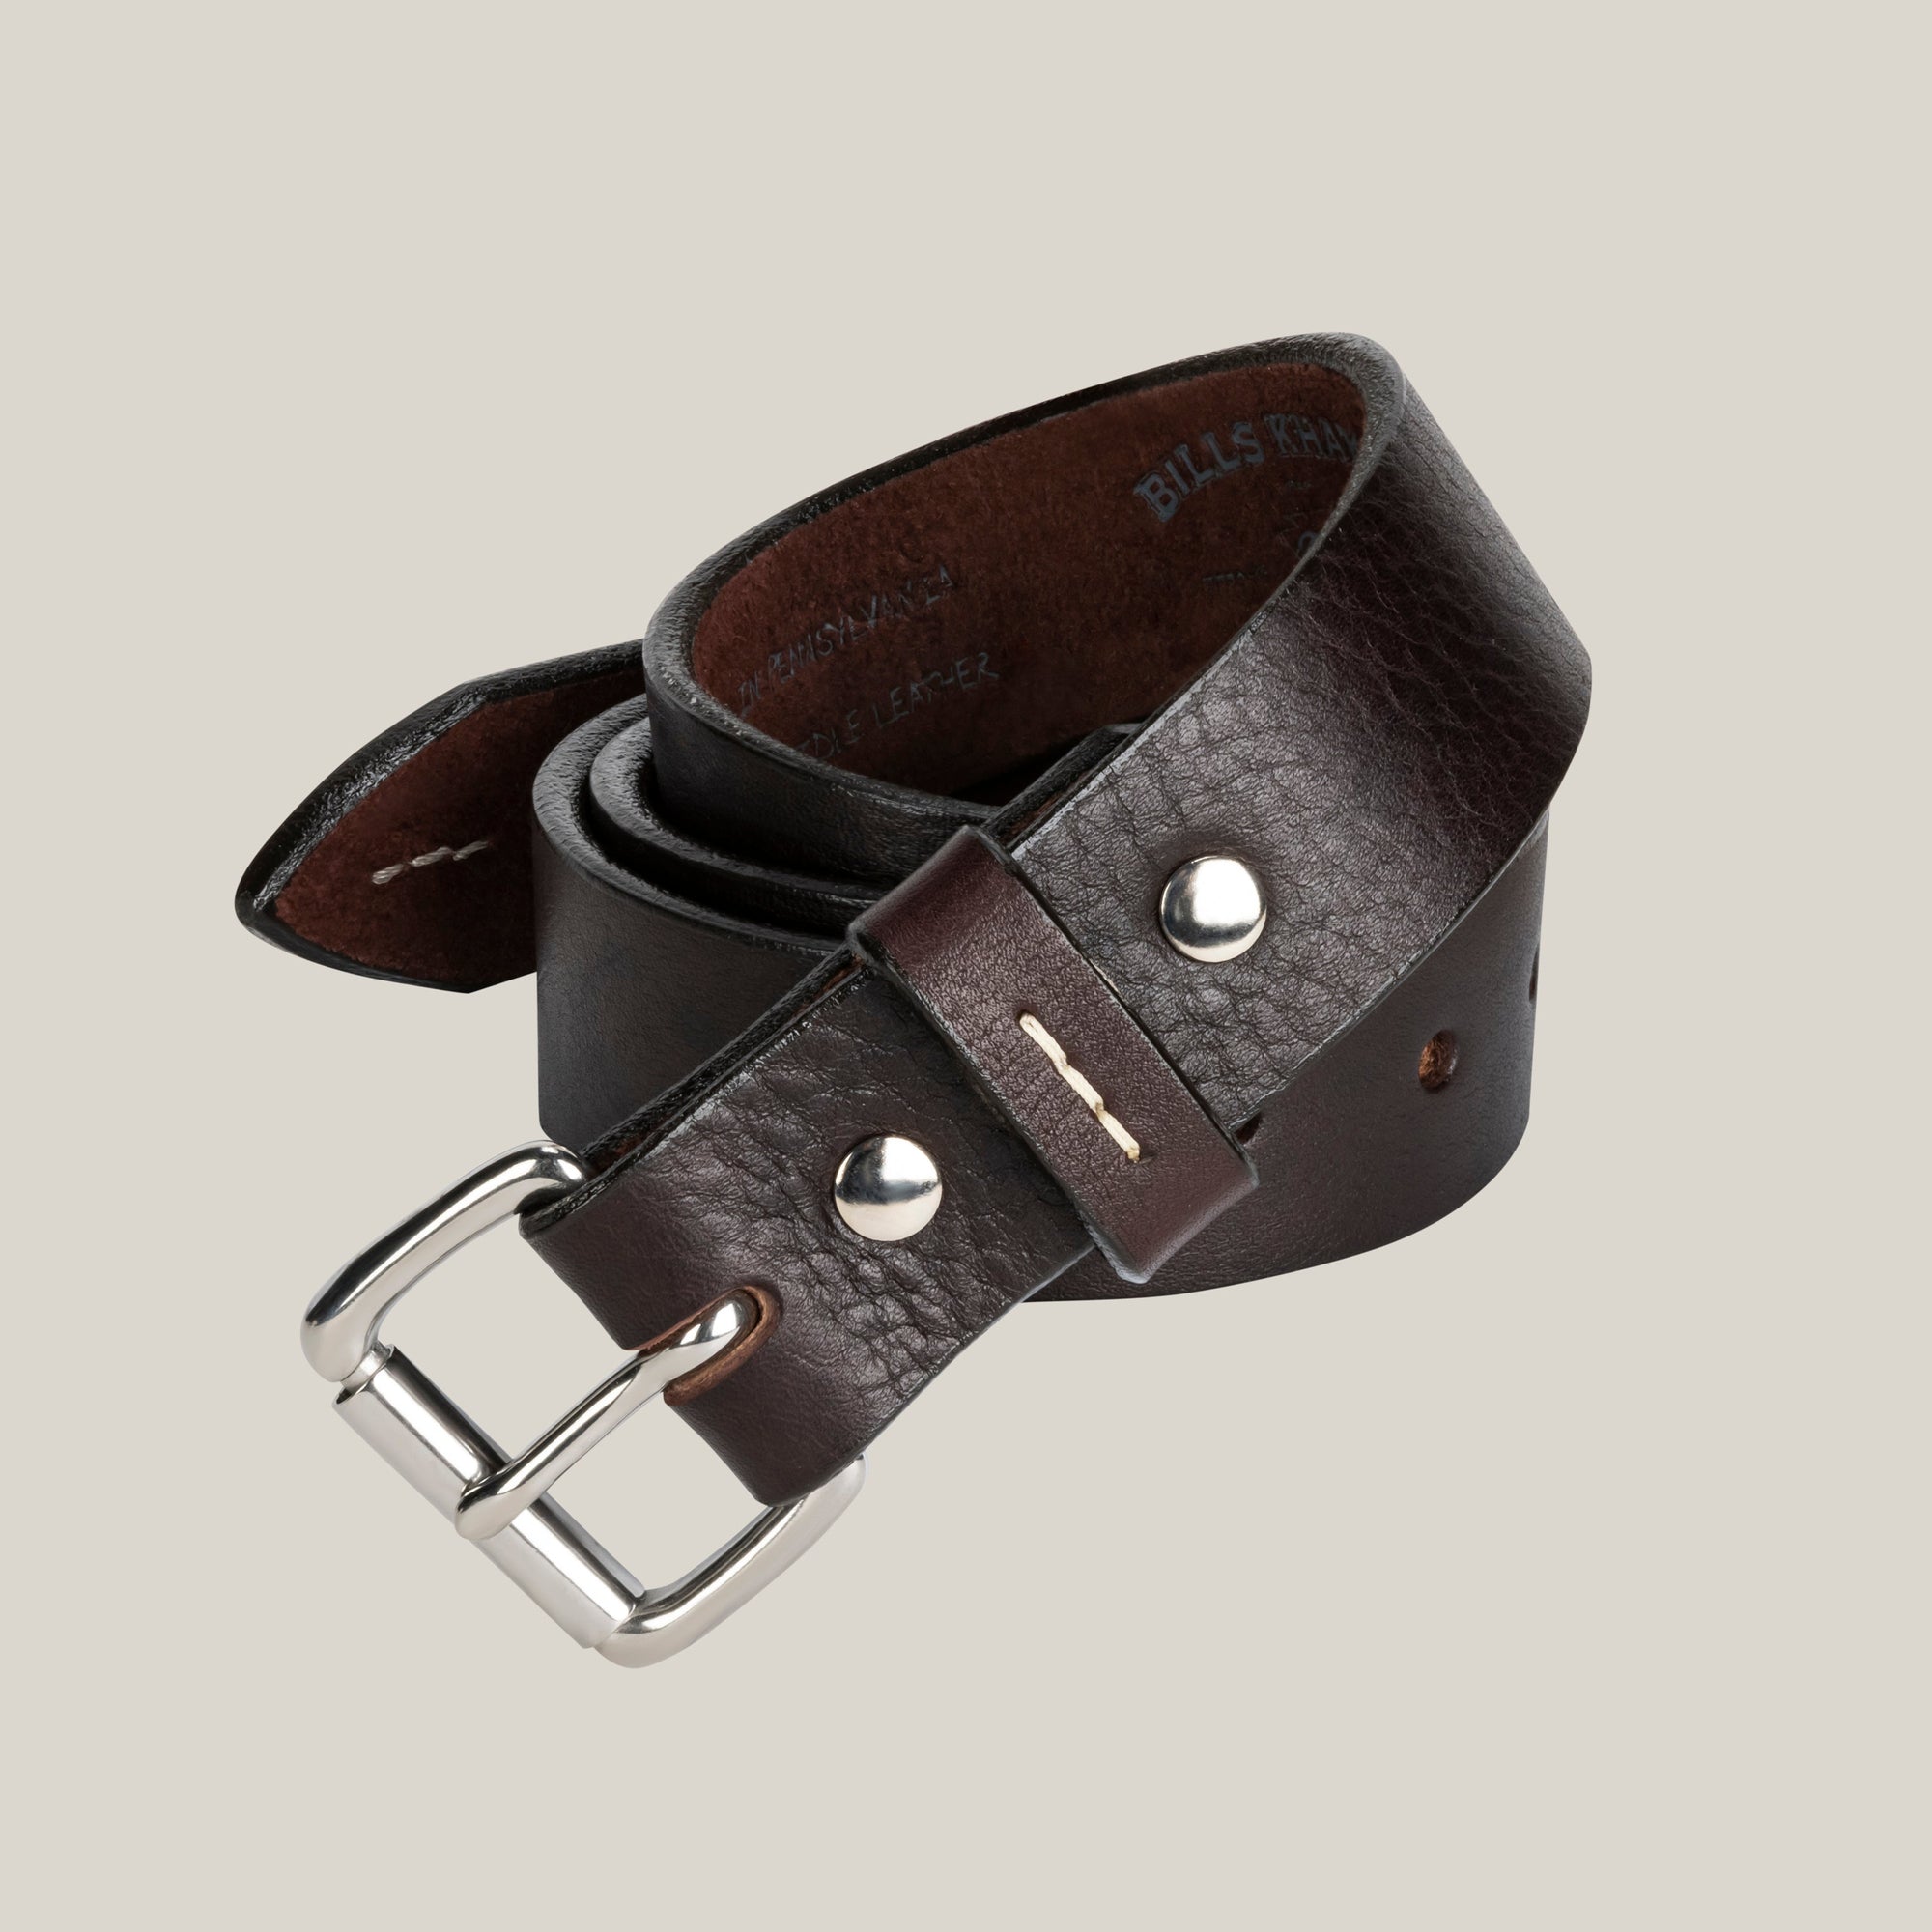 Milled Bridle Leather Belt in Brown by Bills Khakis